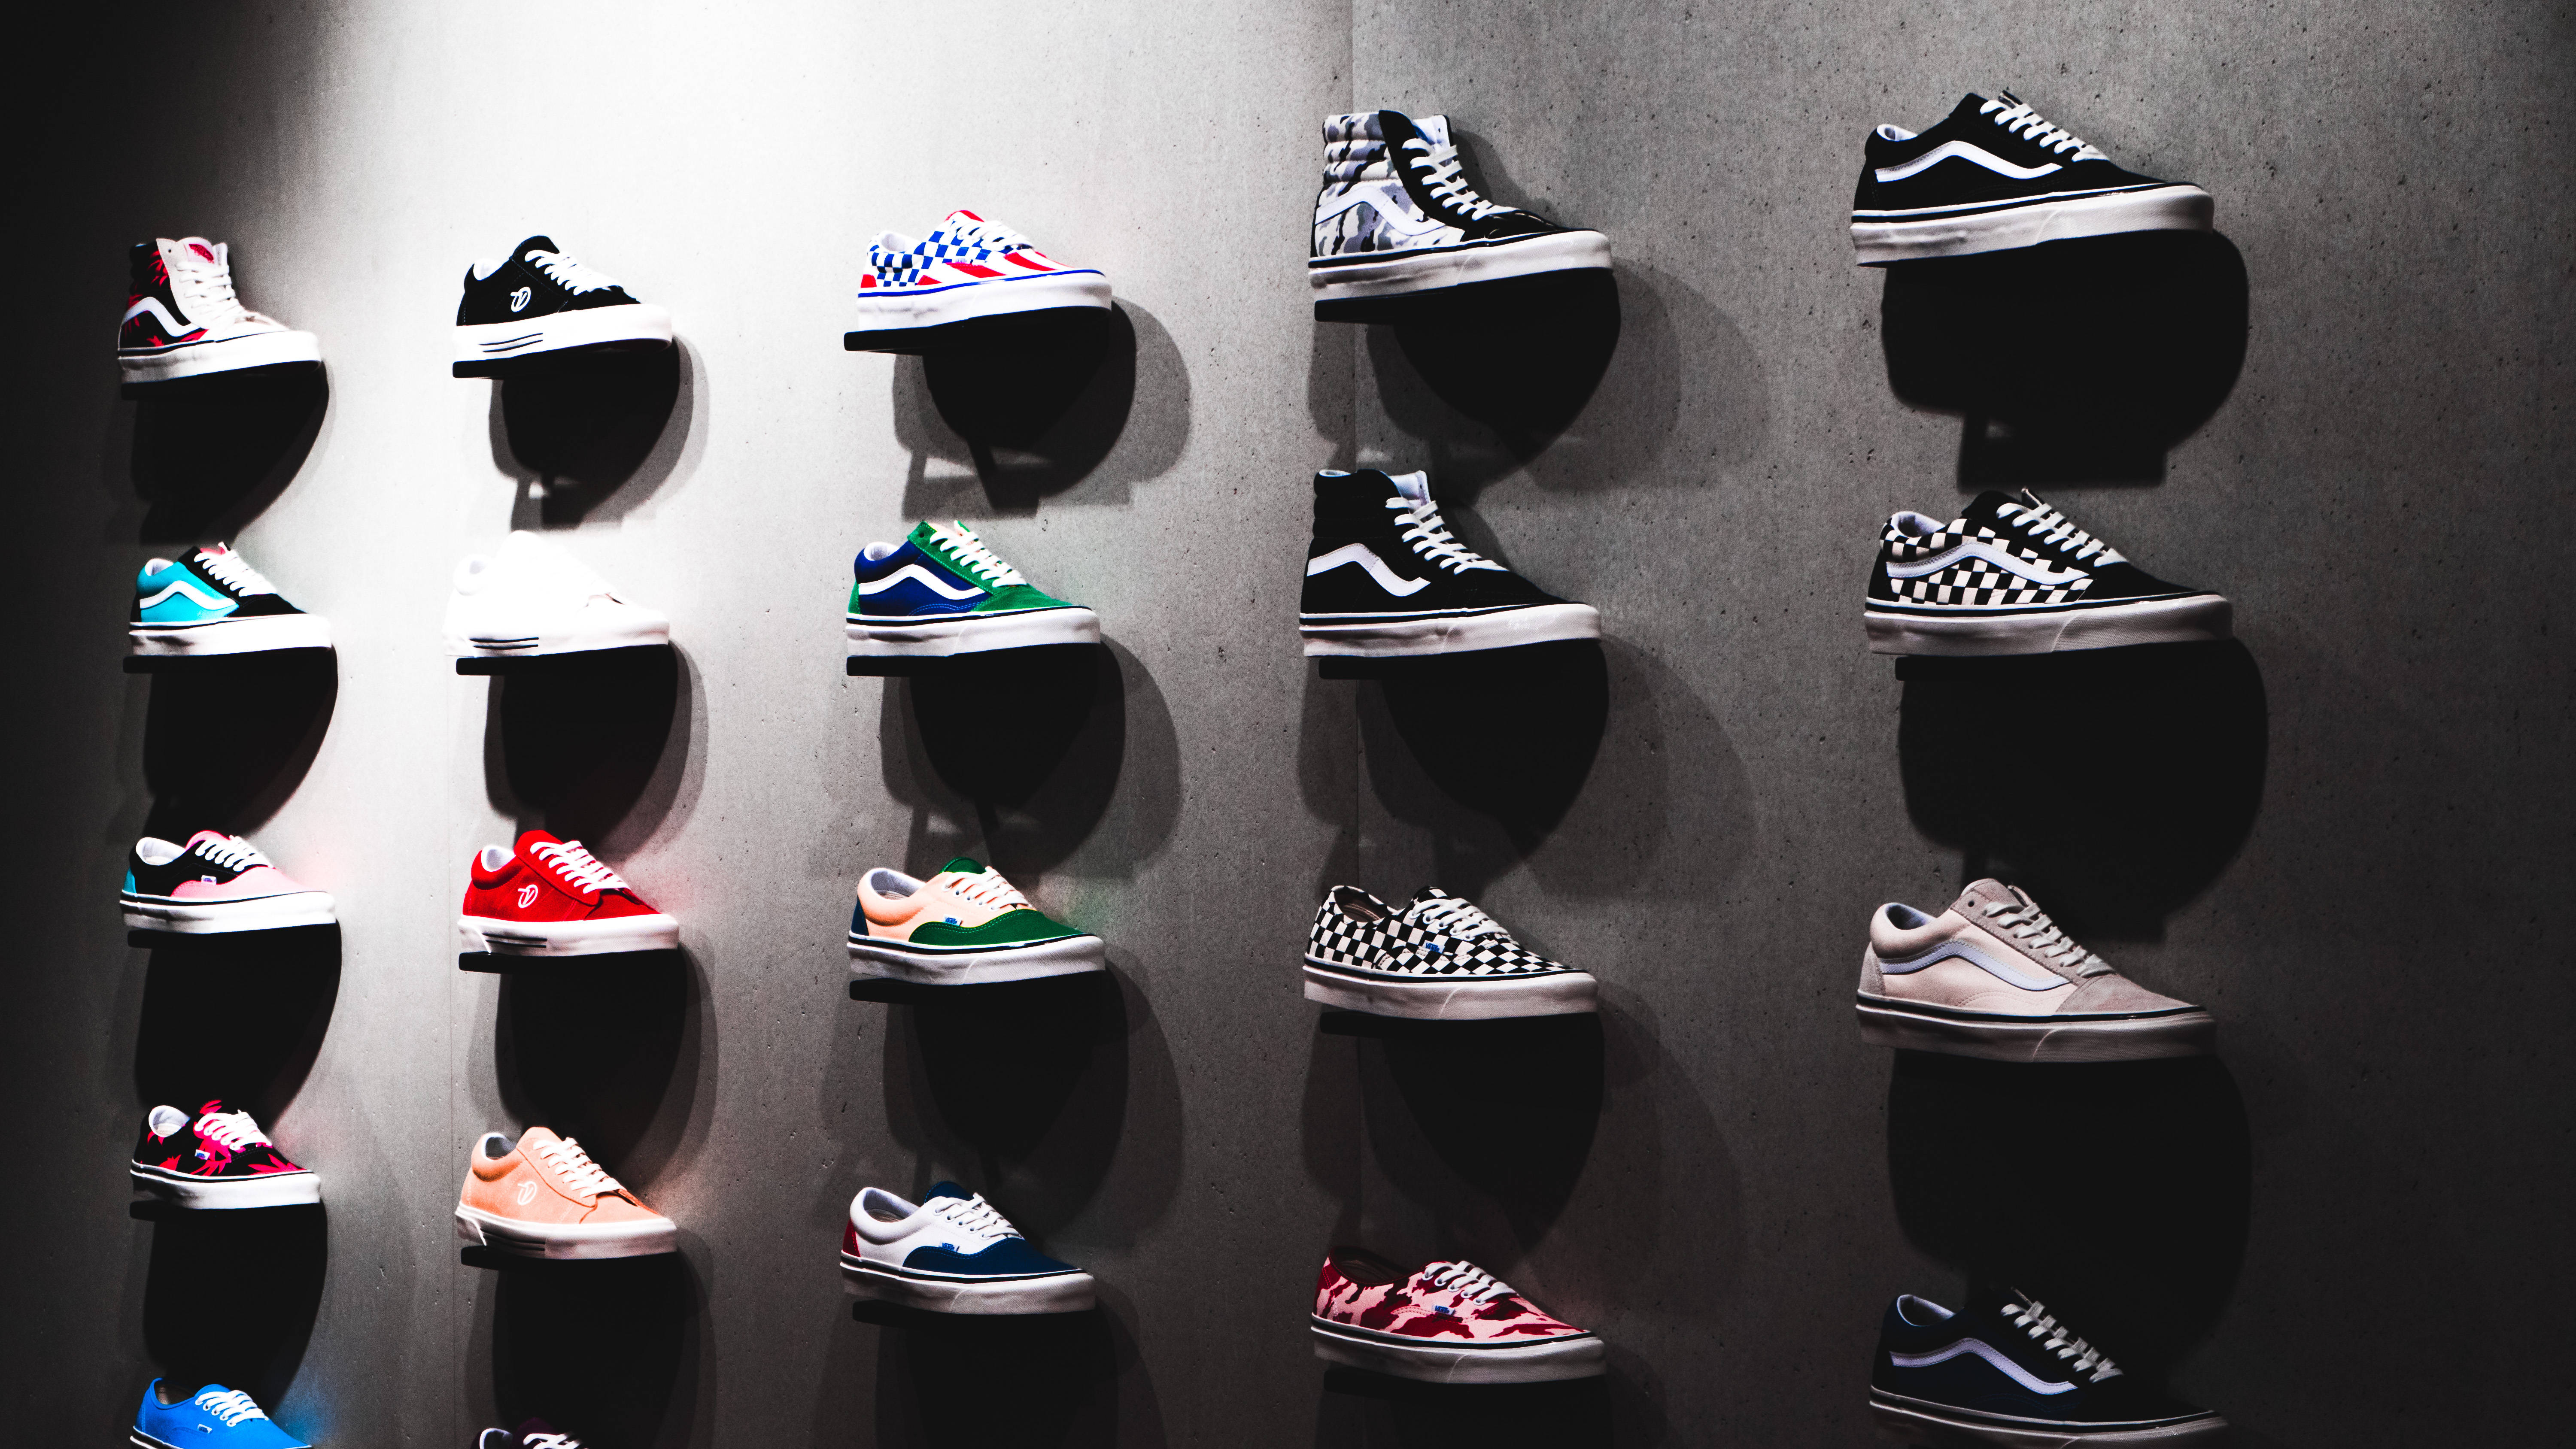 Vans Shoes Wall Display Background